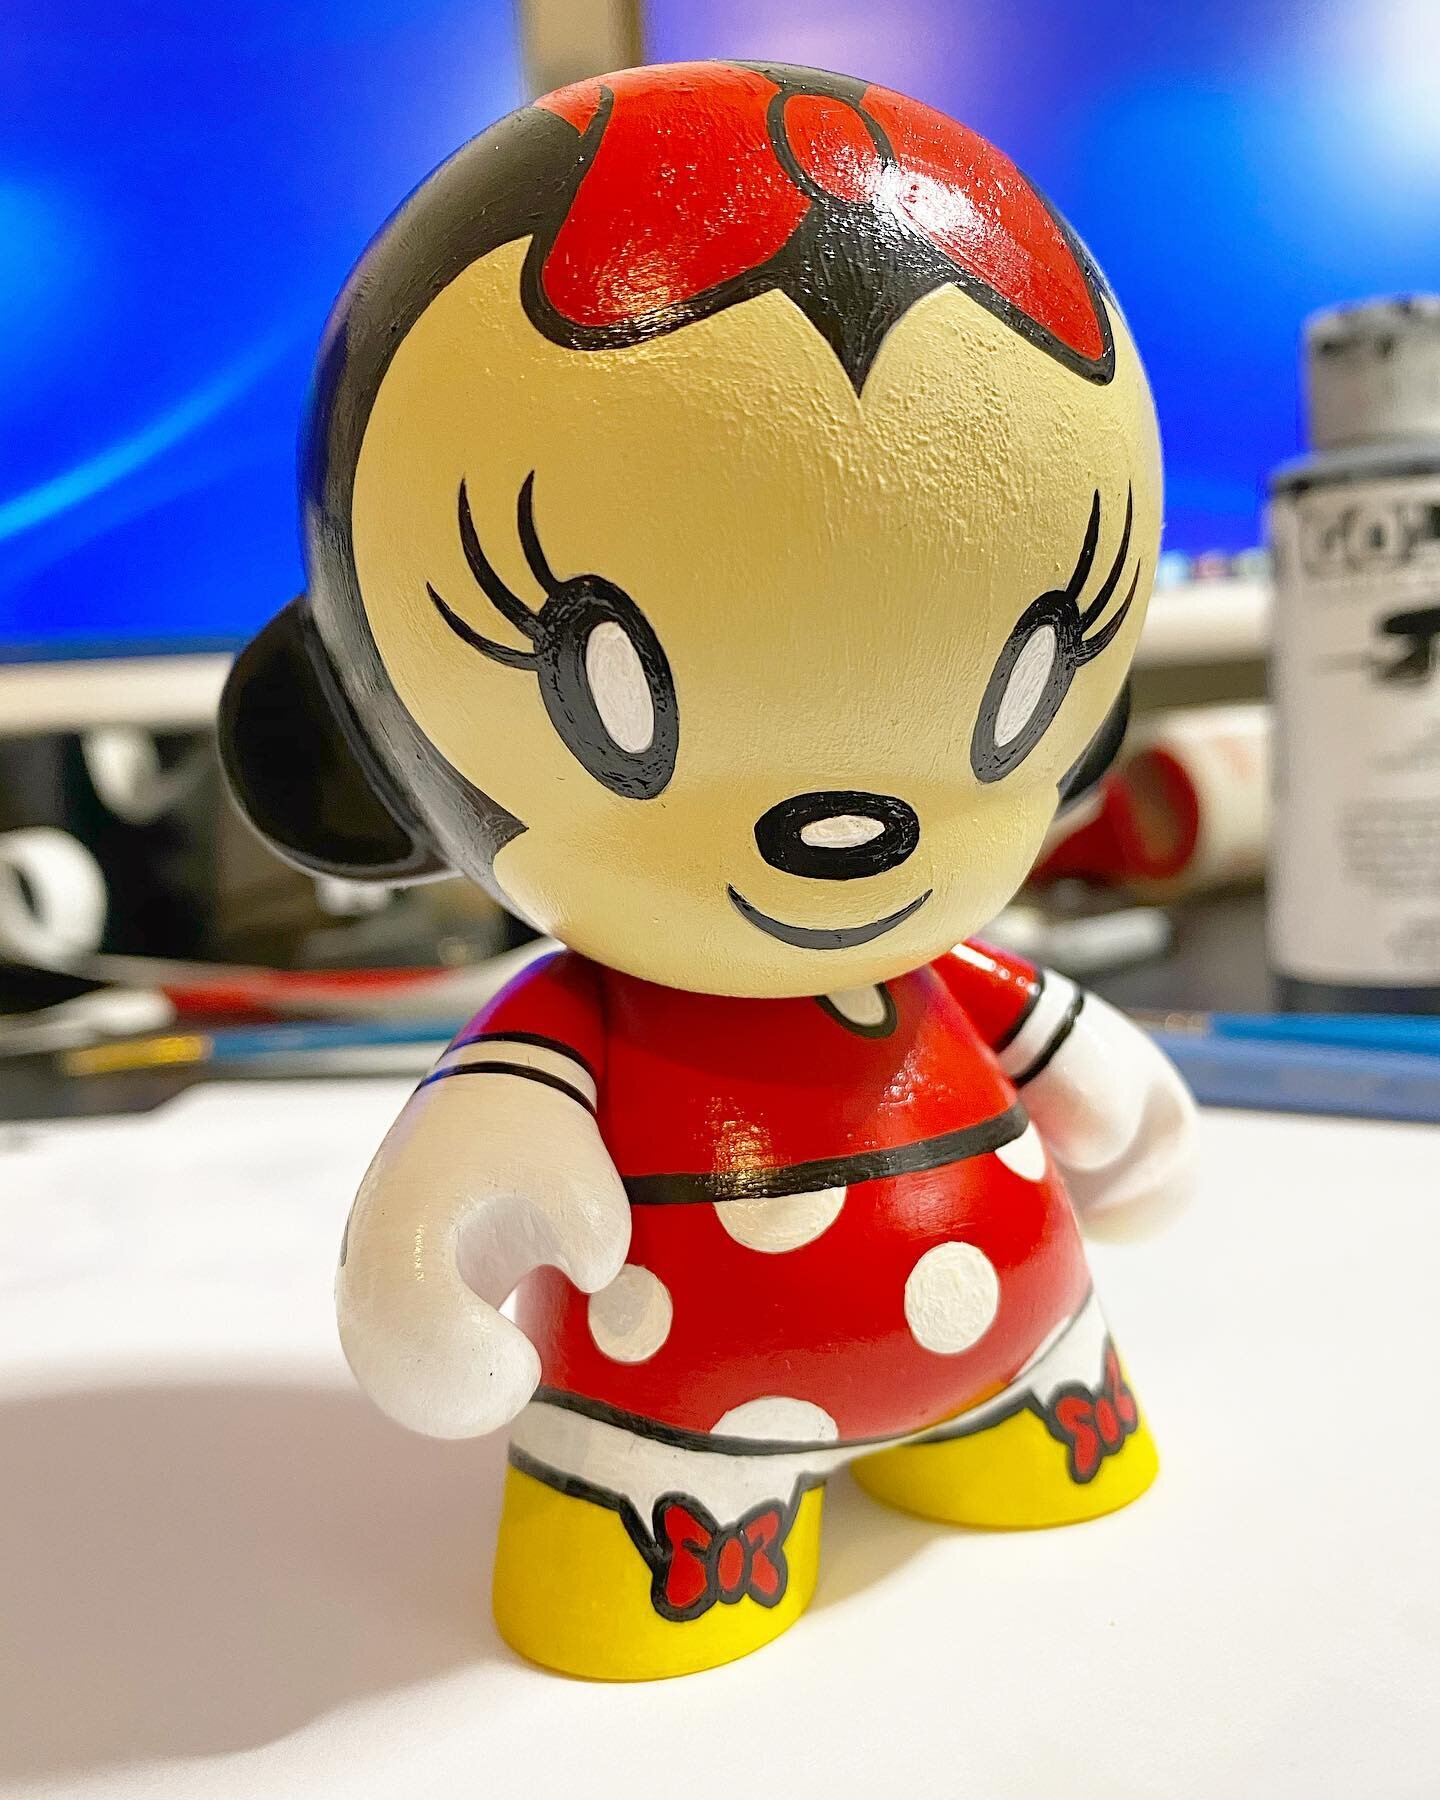 My latest painted toy is done! I believe this is my 7th one 👌🏼. I have one big Munny left, I might do a black and white Mickey...we&rsquo;ll see 👍🏼